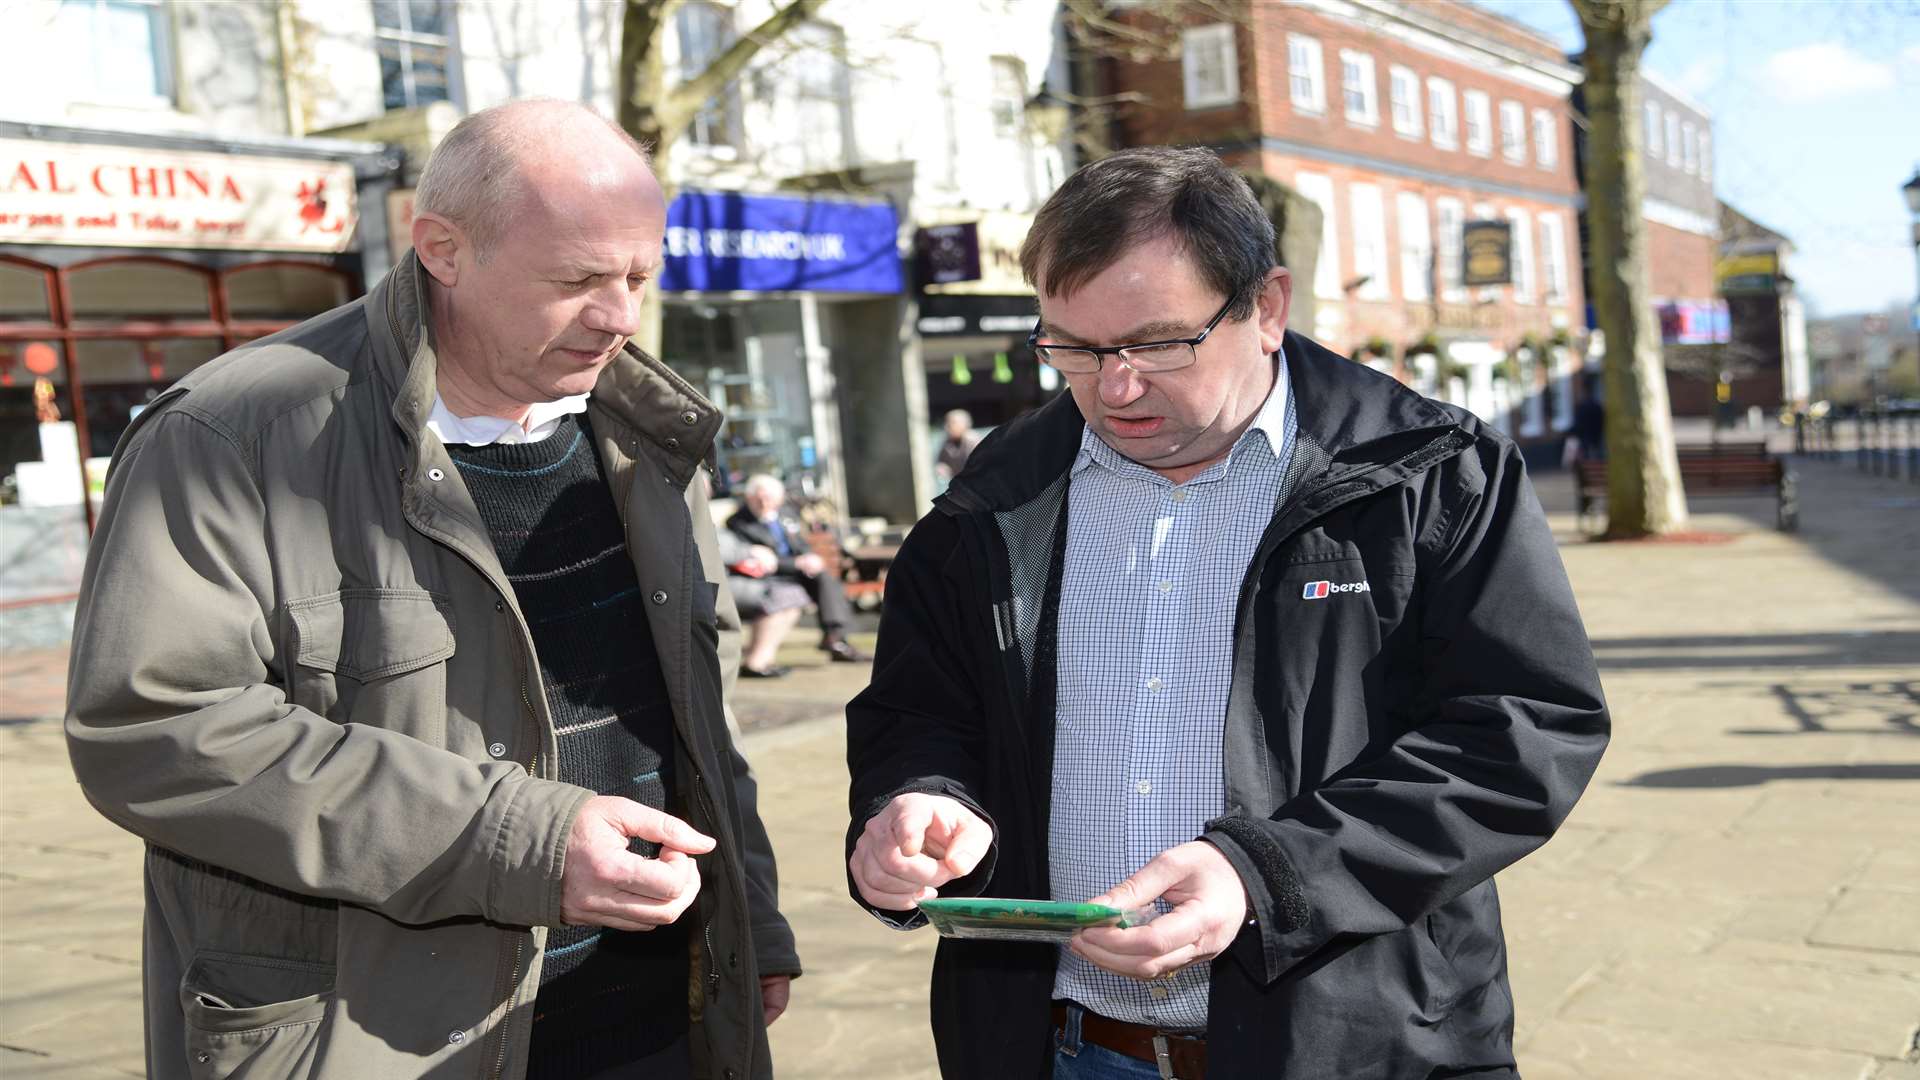 MP Damian Green with Will O'Reilly looking at a recently-purchased packet of illicit rolling tobacco